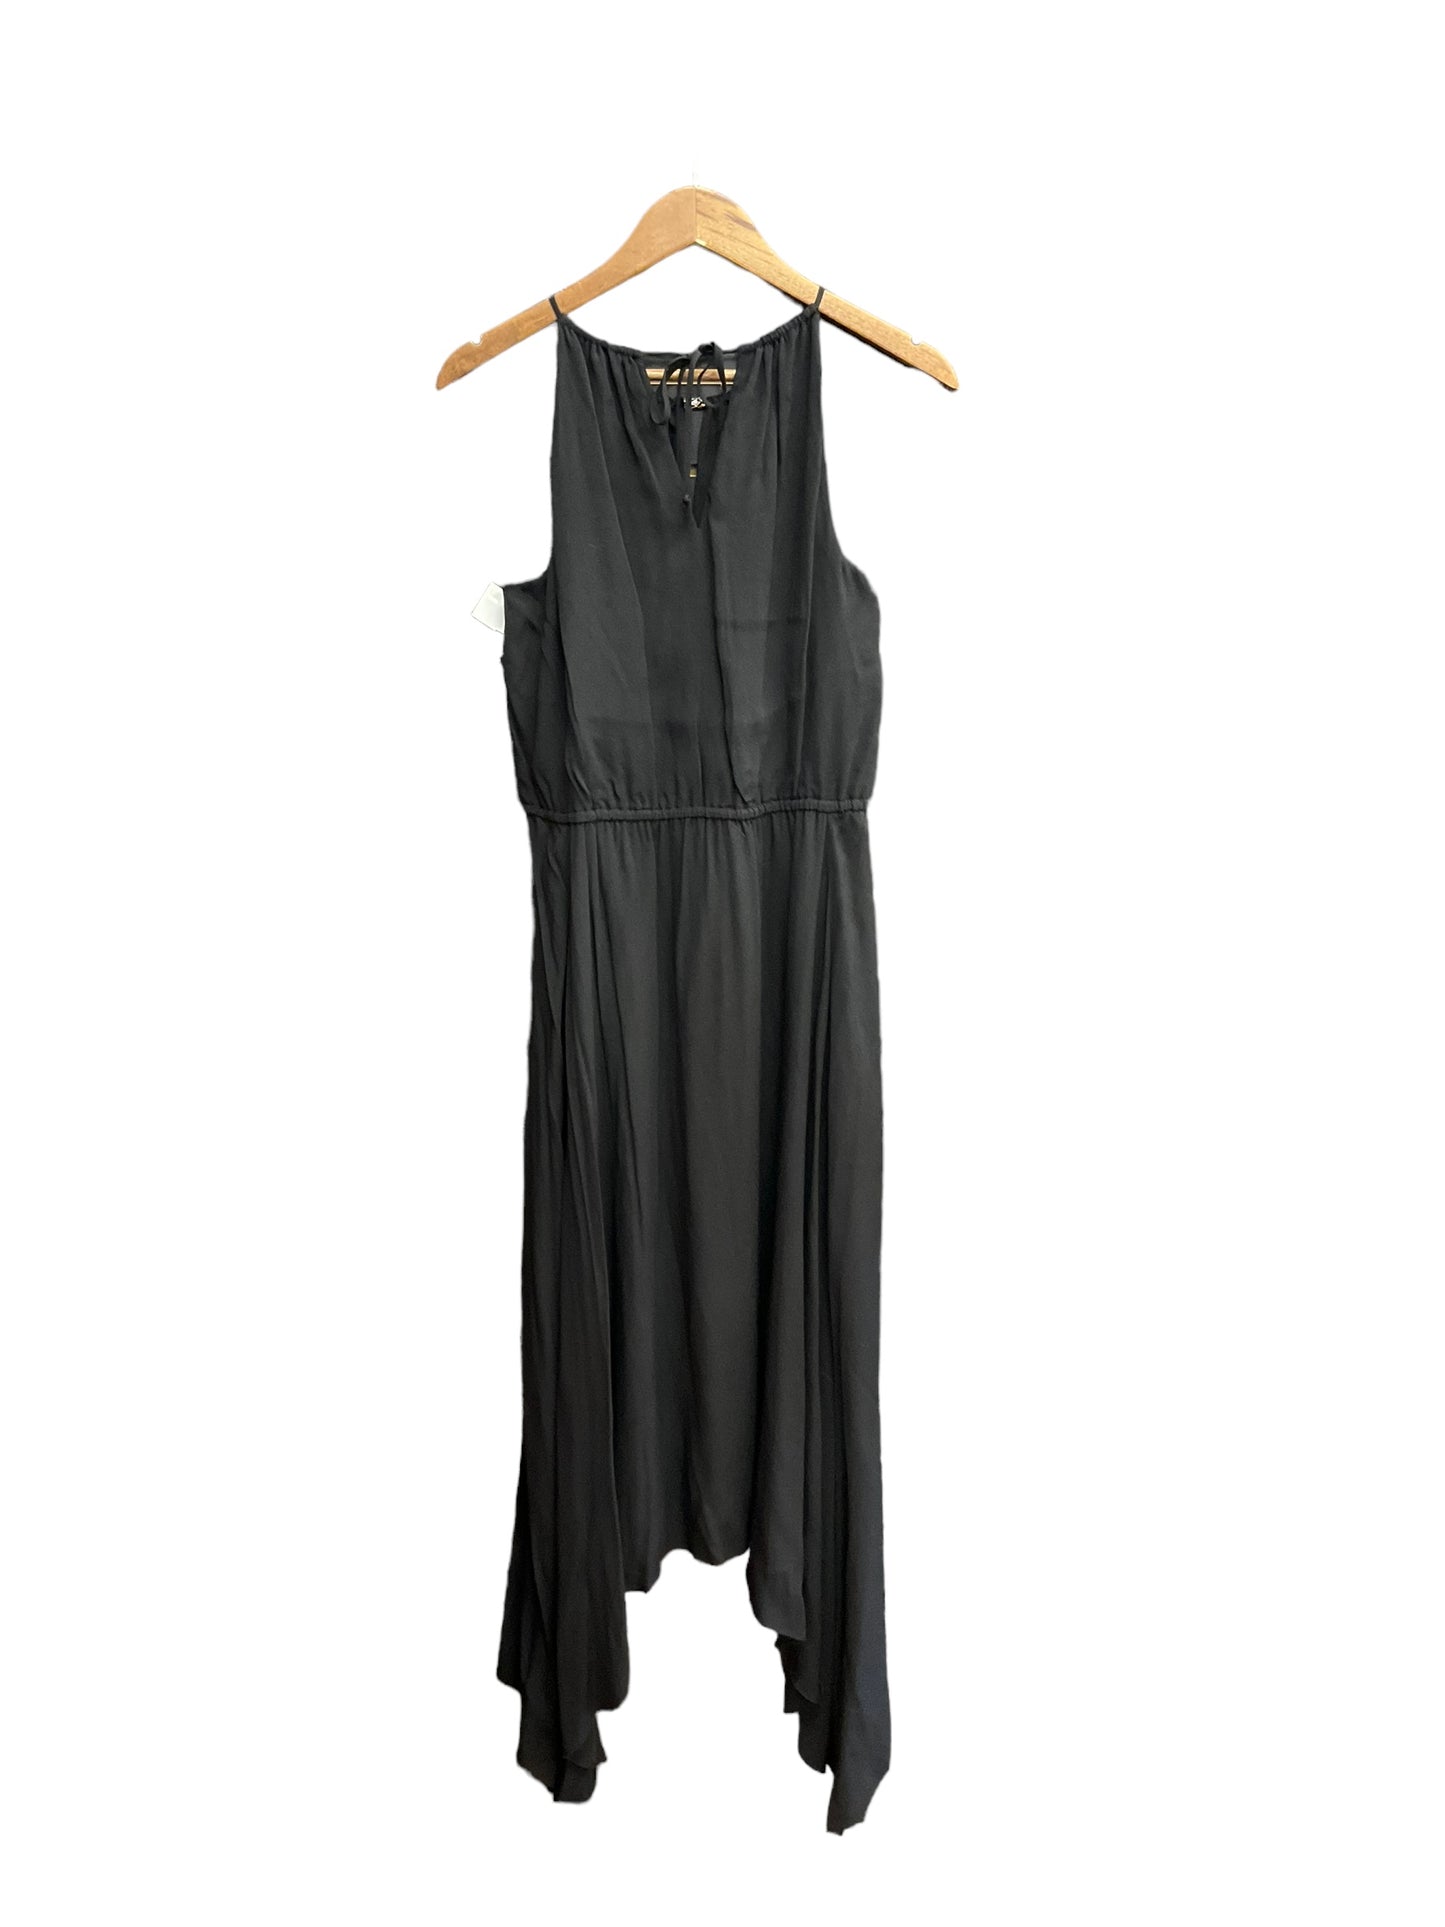 Dress Casual Maxi By White House Black Market  Size: M